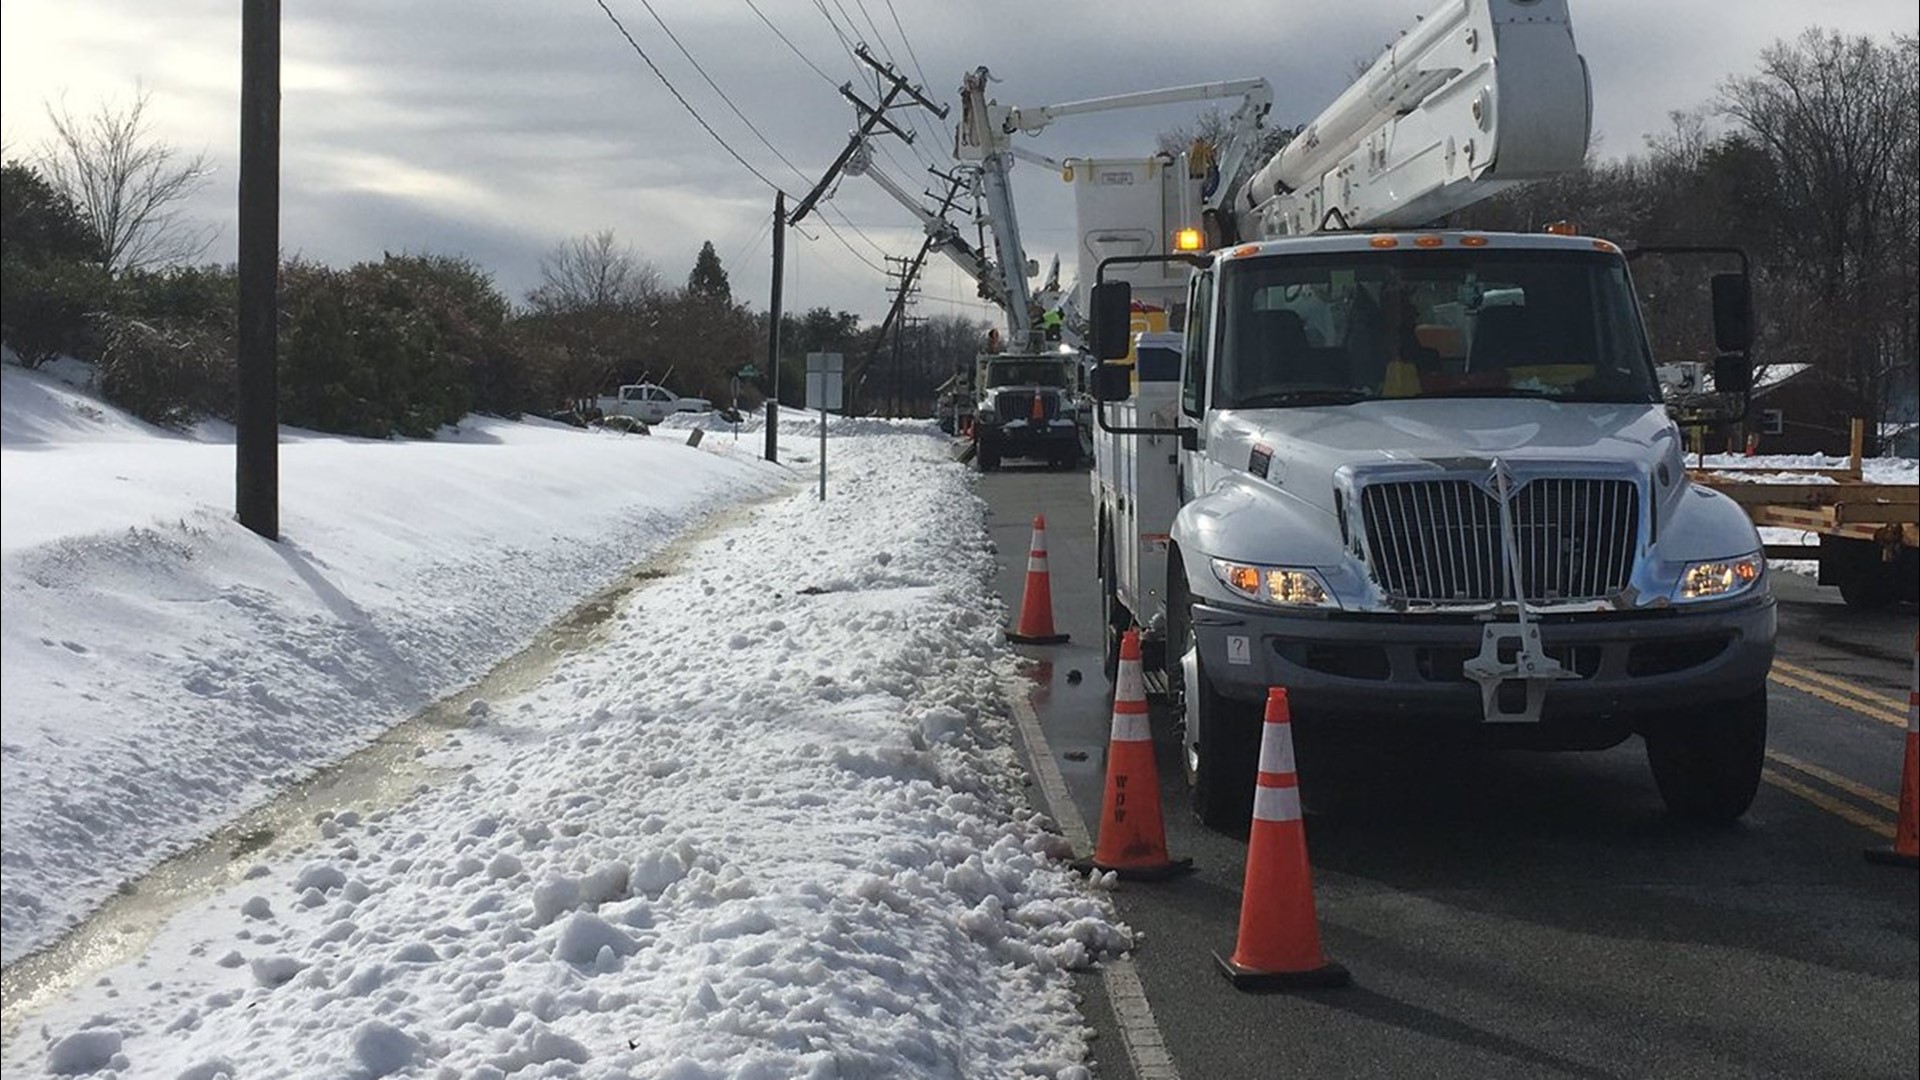 Power crews are working to restore scattered power outages caused by Sunday's winter storm.